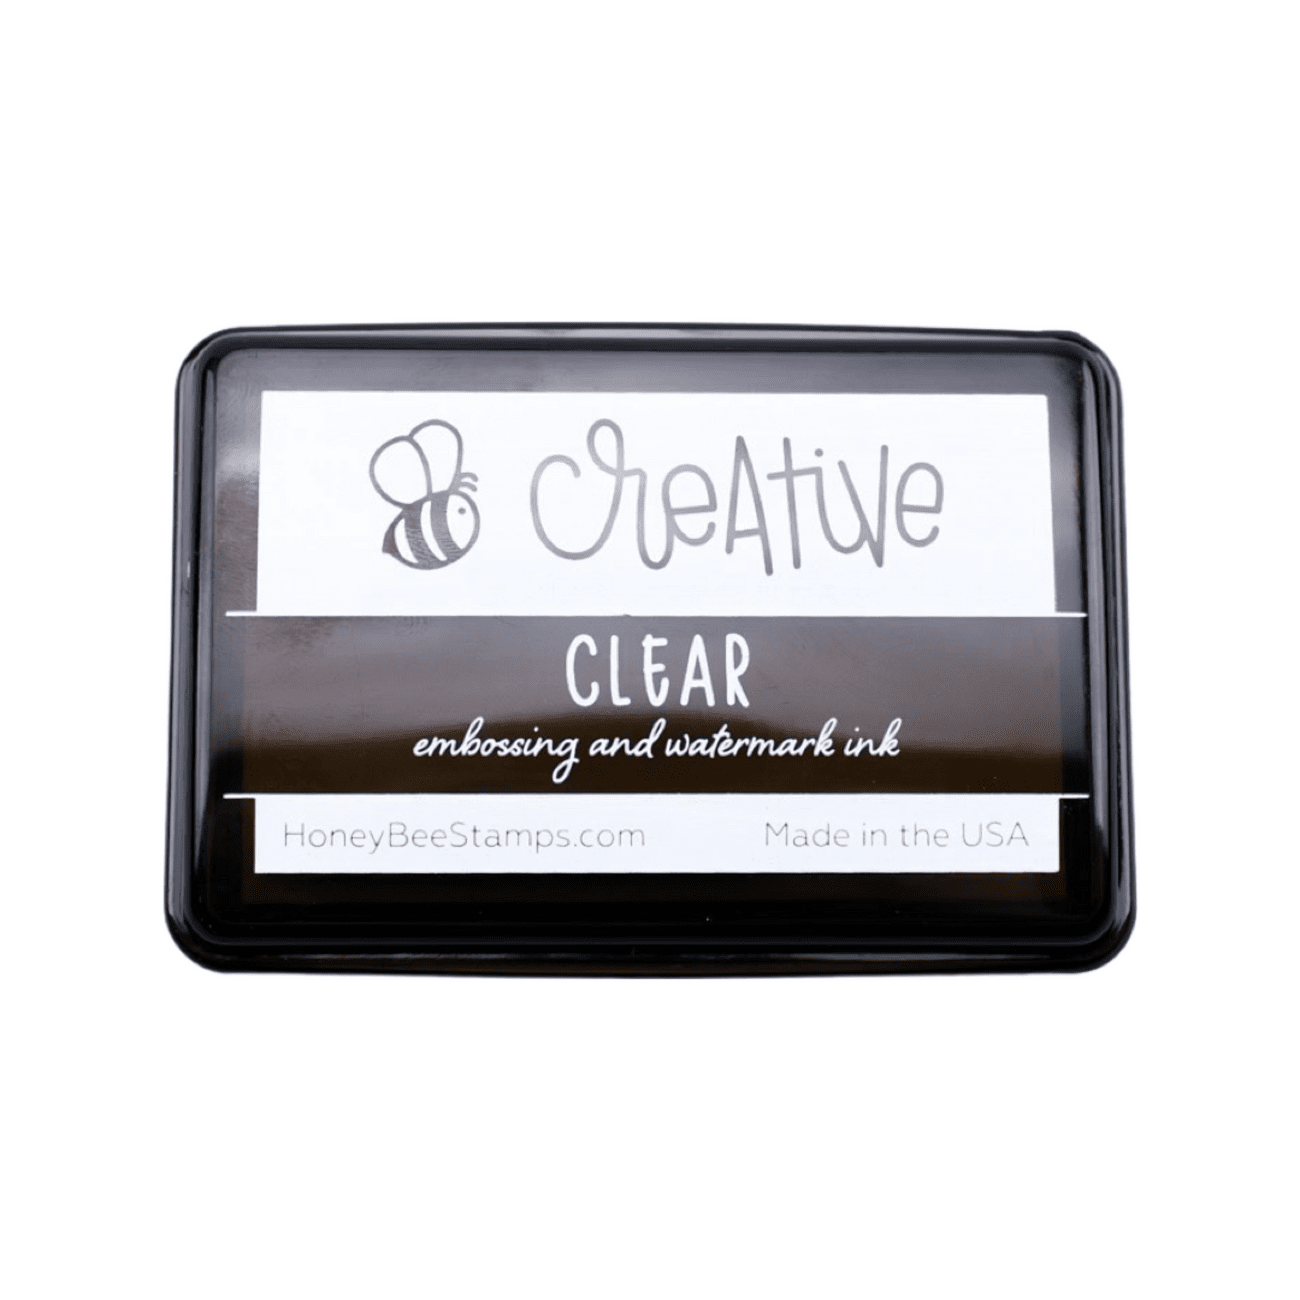 Bee Creative Ink Pad - Brilliant White Pigment Ink by Honey Bee Stamps -  Kat Scrappiness